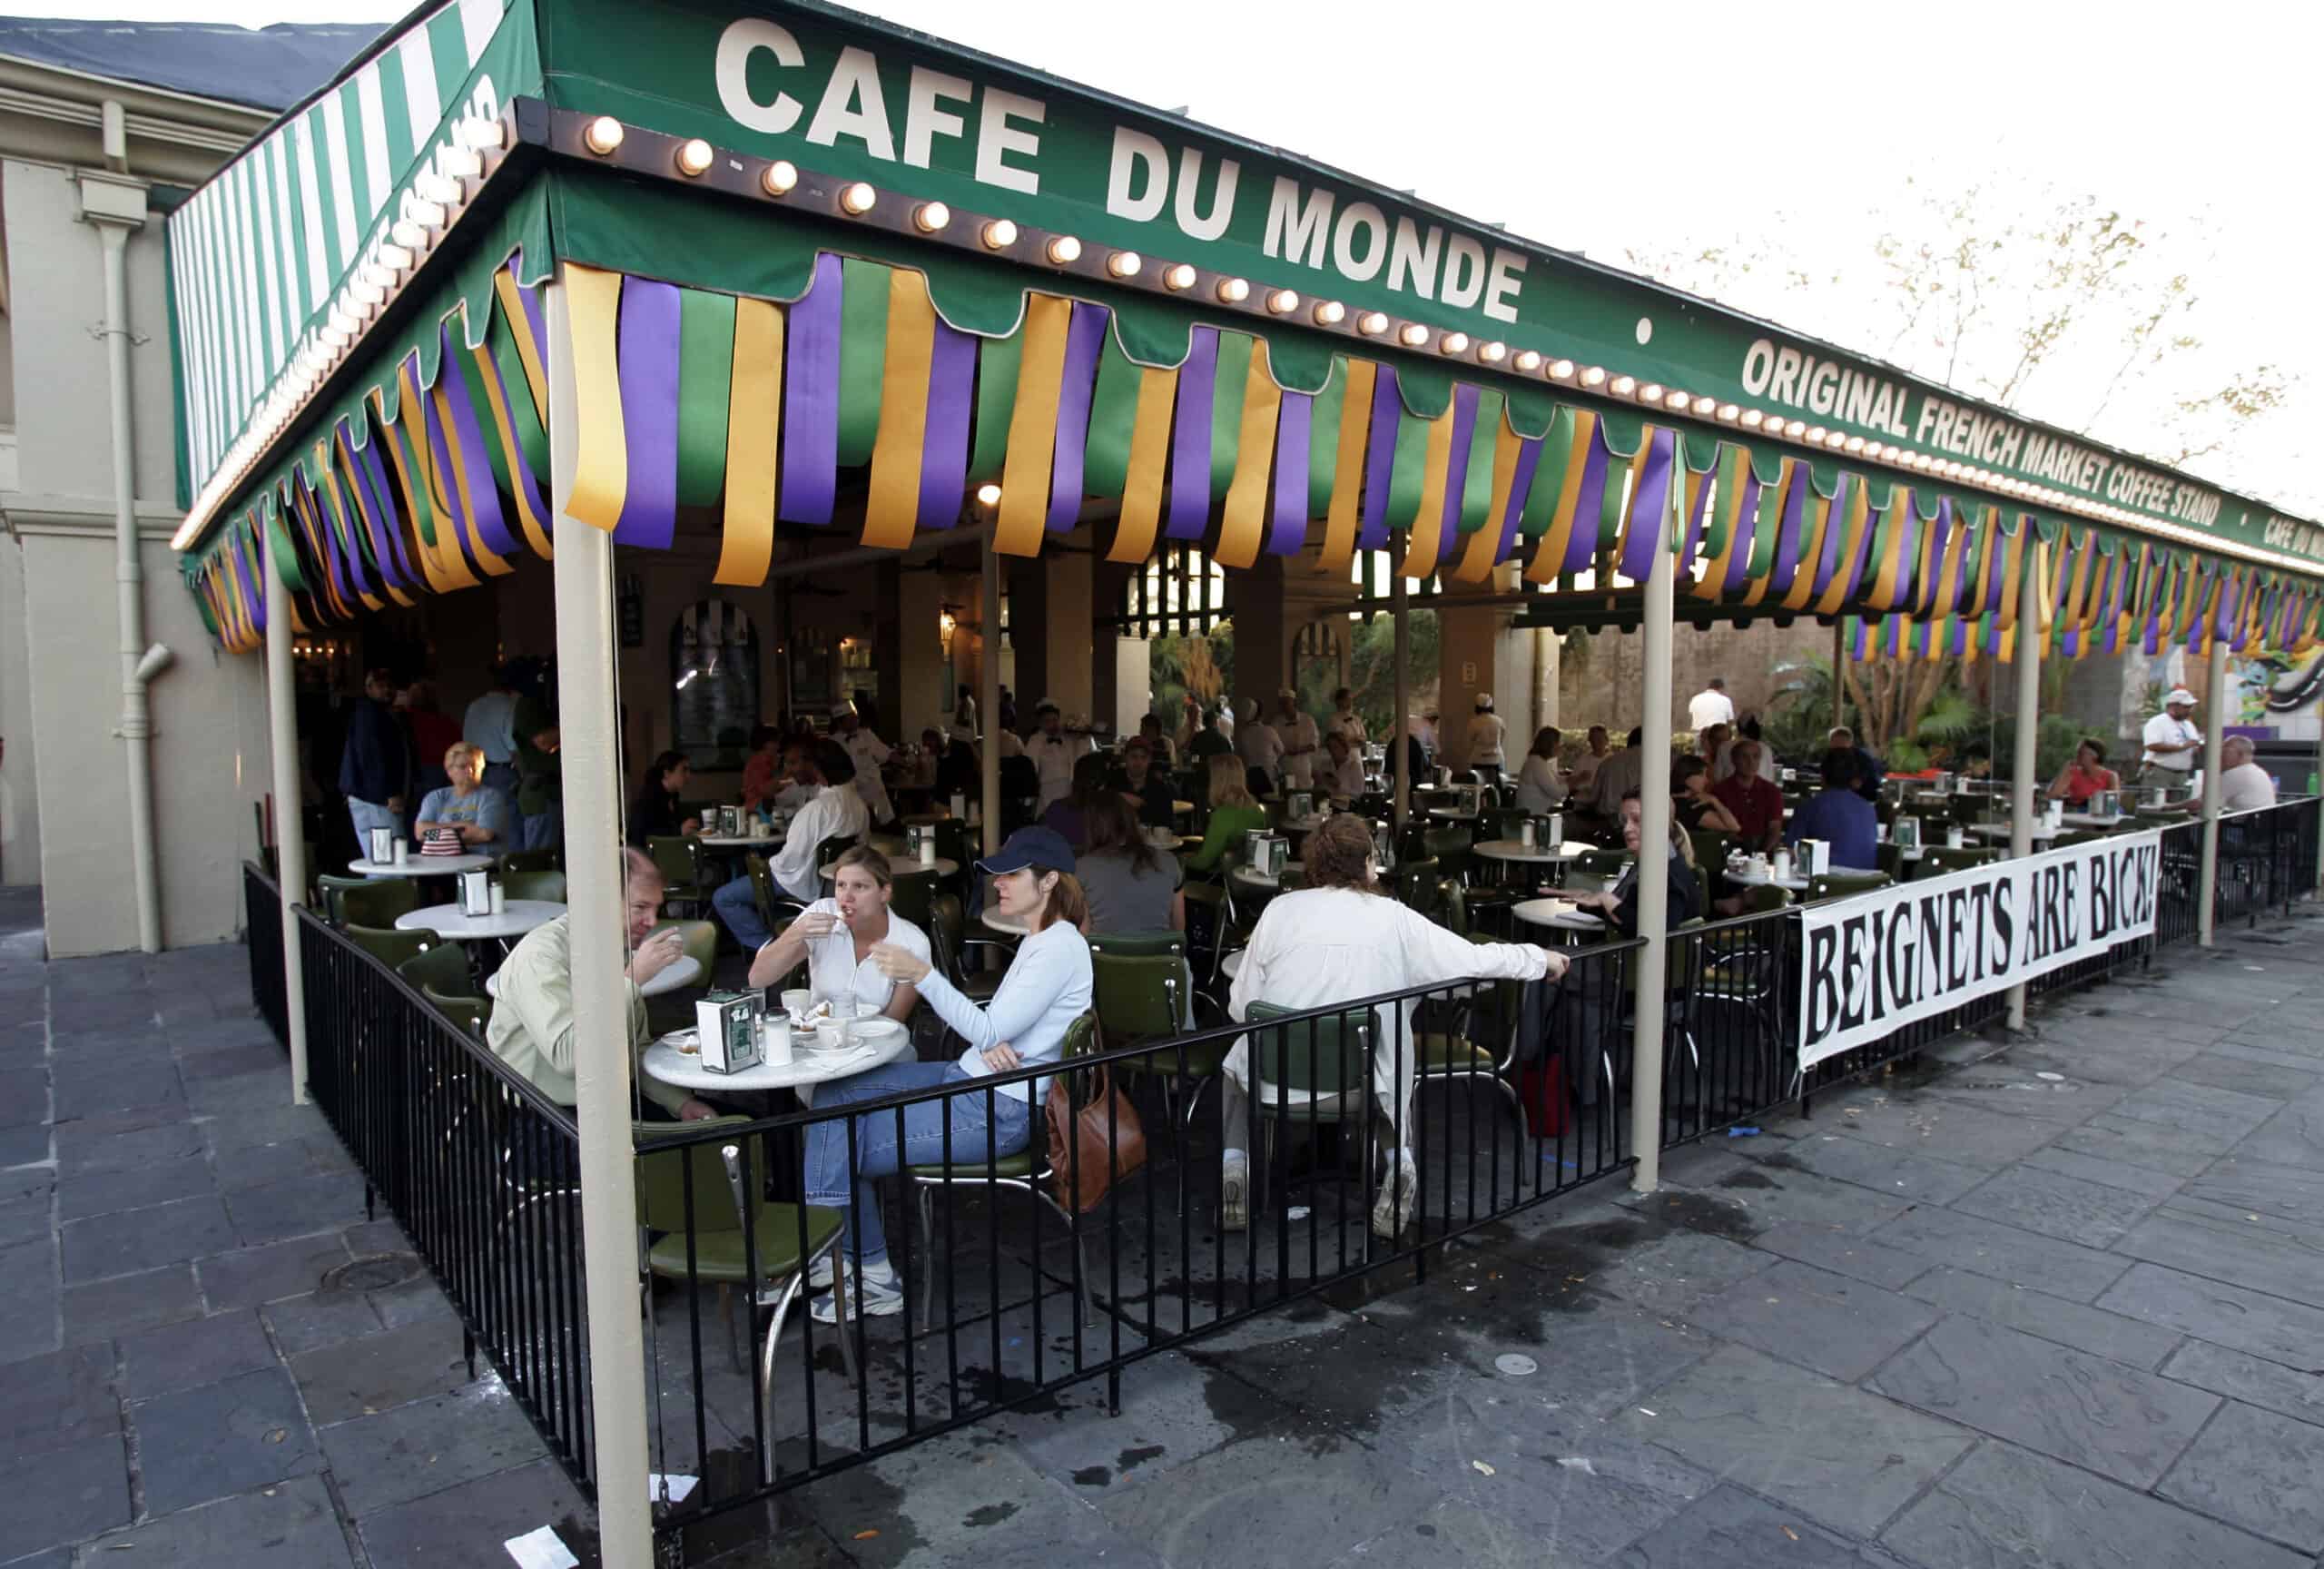 <ul> <li><strong>Location:</strong> New Orleans, Louisiana</li> </ul> <p>This is a perfect example of a tourist trap that you may still want to visit. It is an iconic New Orleans landmark that is, by some accounts, the world's most famous coffee shop. The café has been serving cafés au lait and New Orleans-style beignets since 1862.</p> <p>The coffee and beignets are delicious, but Café Du Monde's history and reputation make it a must-stop destination for nearly every tourist in New Orleans. That means the lines are often very long. The atmosphere inside can be chaotic. One reviewer noted that they felt very rushed during the ordering process.</p> <p>Numerous reviewers referred to Café Du Monde as a tourist trap. It may still be worth a stop, just to say you've been there. But if you are more concerned about scoring some delicious beignets instead of just checking a destination off of your list, there are plenty of less-crowded places in New Orleans that serve them.</p> <p>Agree with this? Hit the Thumbs Up button above. Disagree? Let us know in the comments with what you'd change.</p>